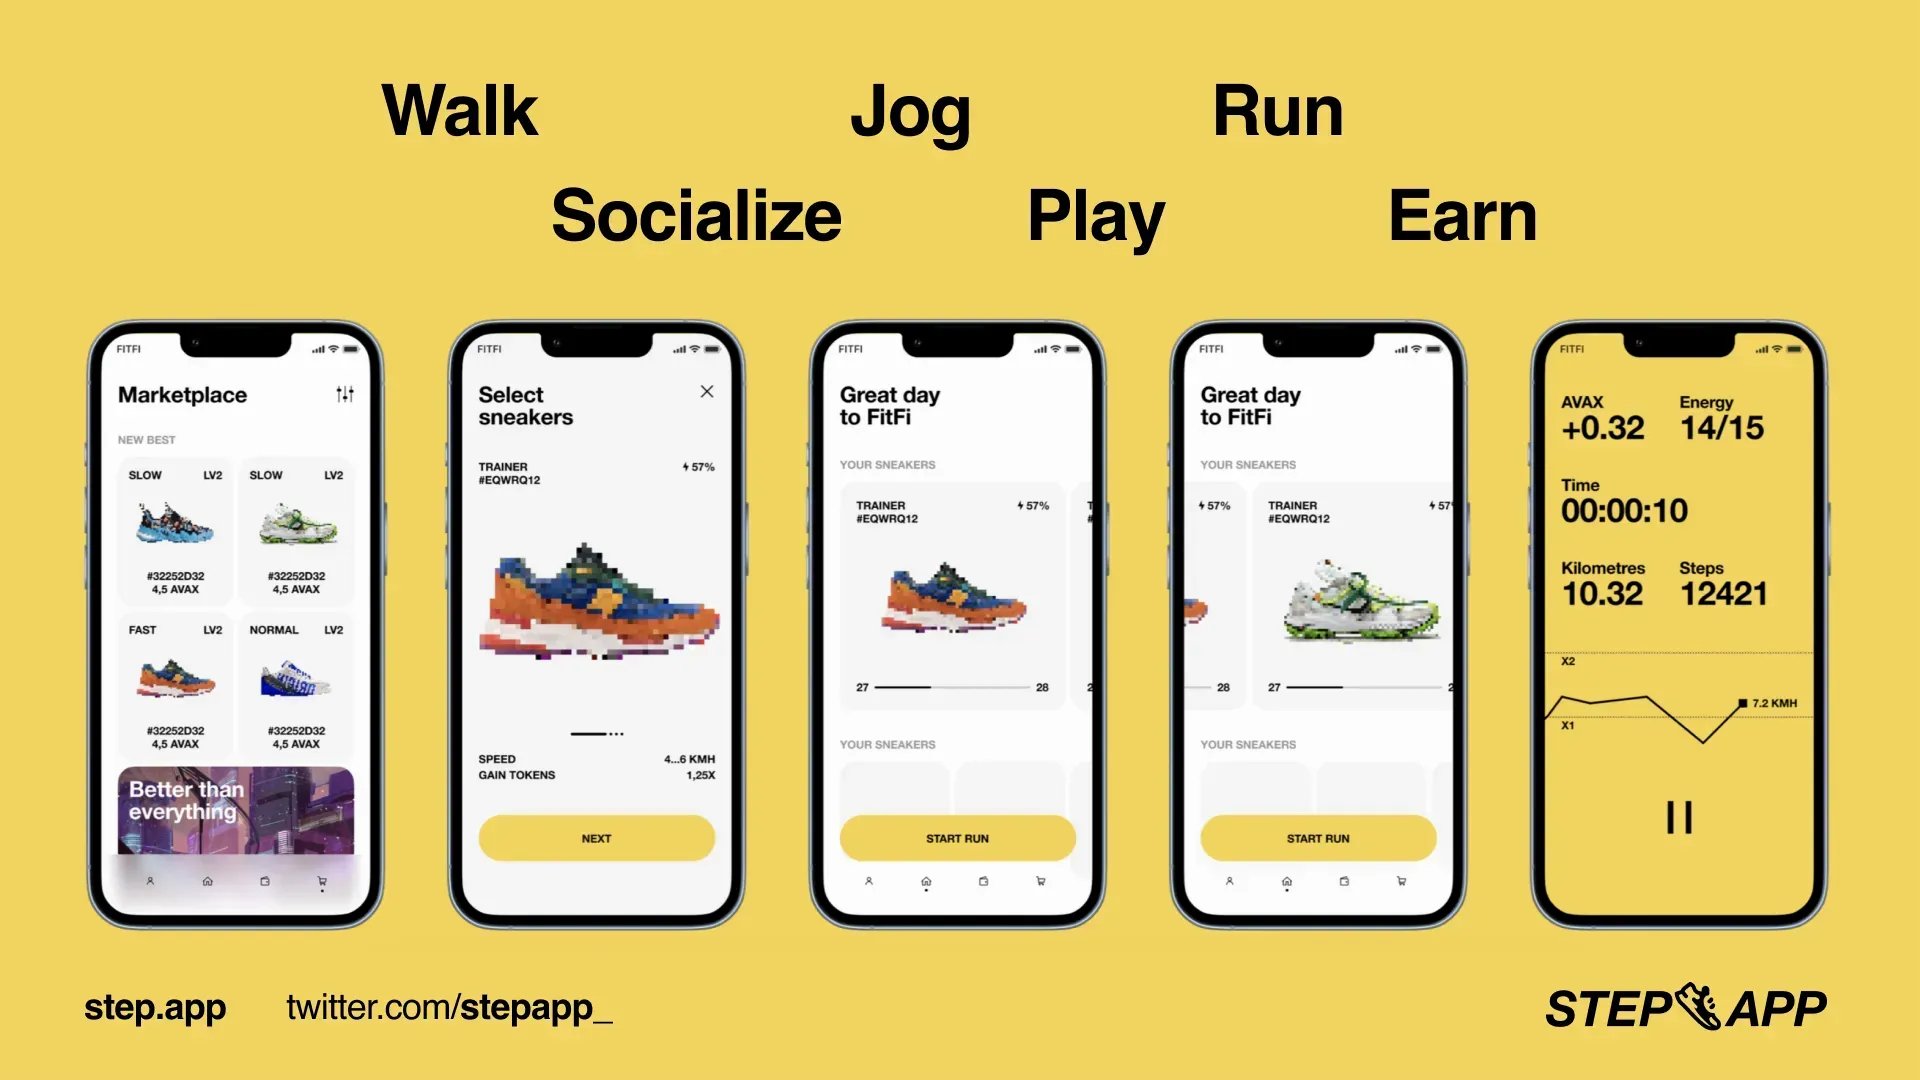 Step App on Twitter: "Earning while doing fitness activities will probably be the most lucrative trend in these market conditions! #MoveToEarn $FITFI https://t.co/JqxPyjTi8f" / Twitter